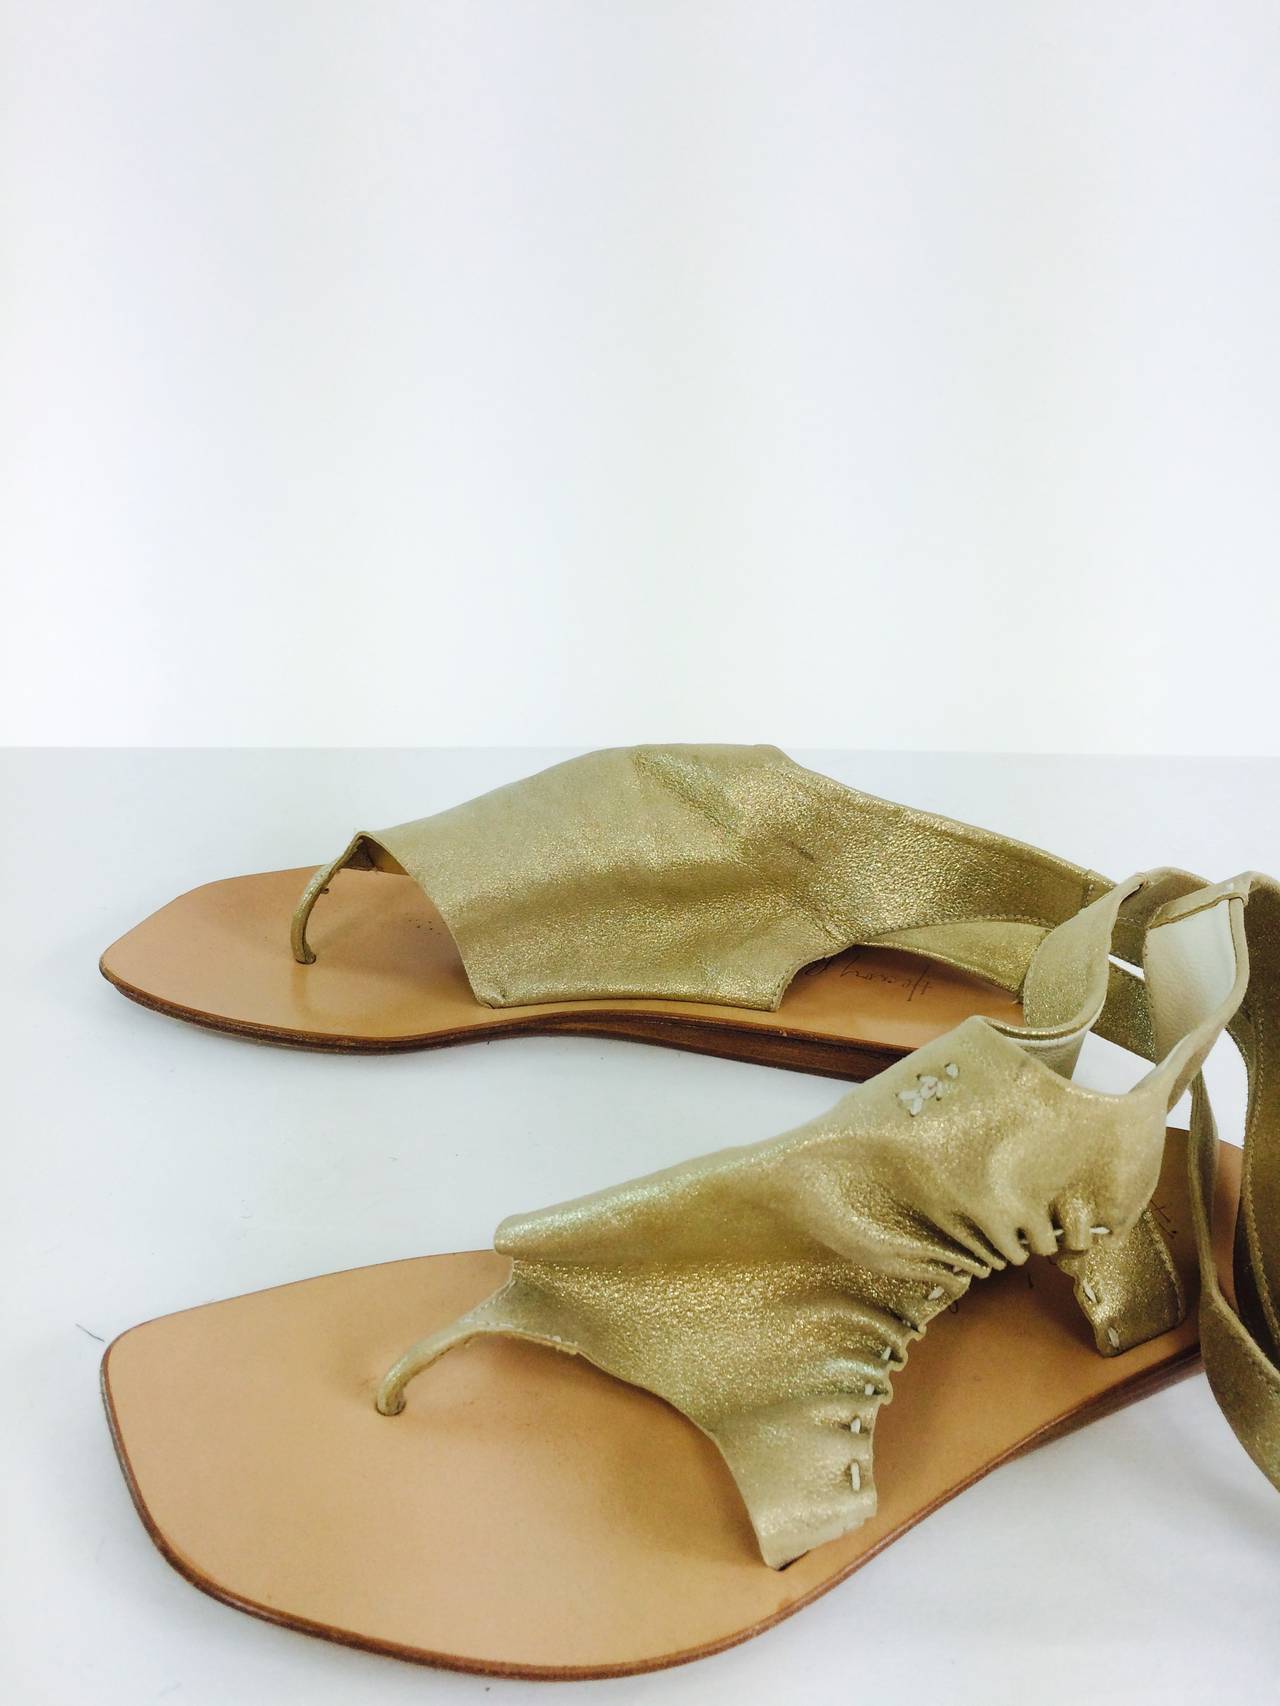 Henry Beguelin gold soft leather ankle wrap thong sandals, leather soles, barely worn marked size 38